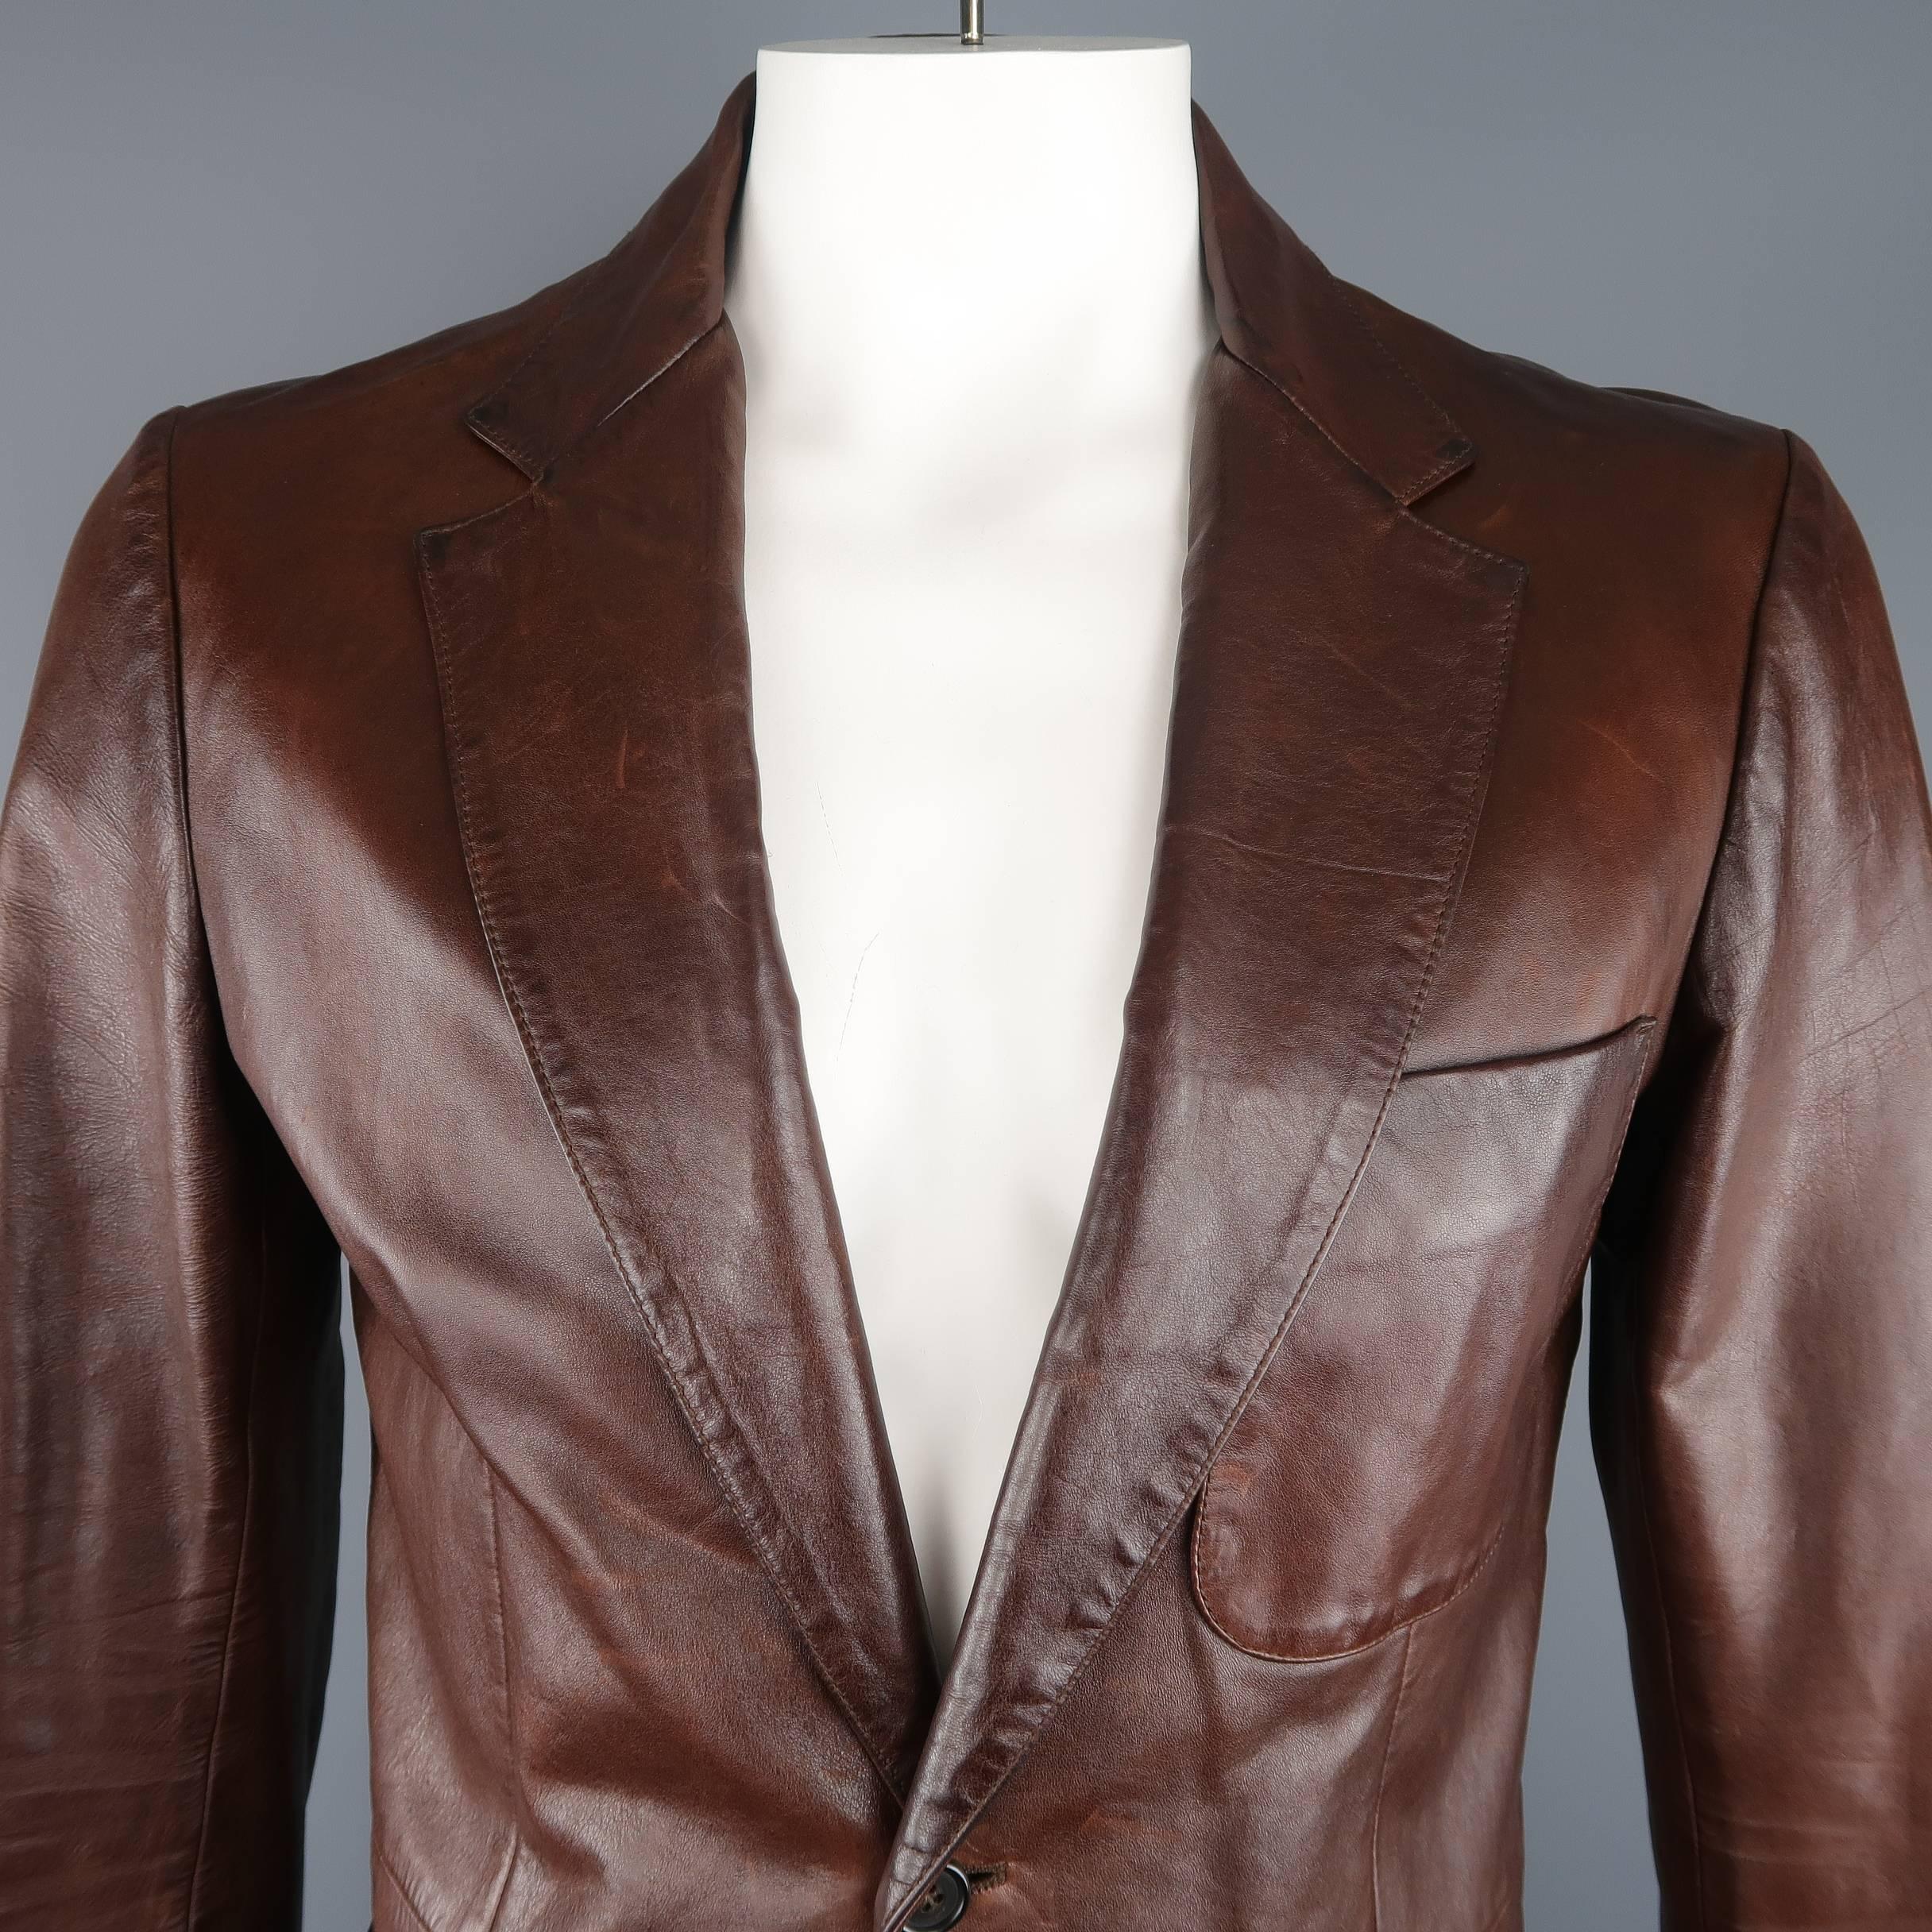 Vintage PRADA sport coat comes in brown leather with a notch lapel, two button front, functional button cuffs, and patch pockets. Wear throughout leather and mark on front. As-is. Made in Italy.
 
Fair Pre-Owned Condition.
Marked: IT 52
